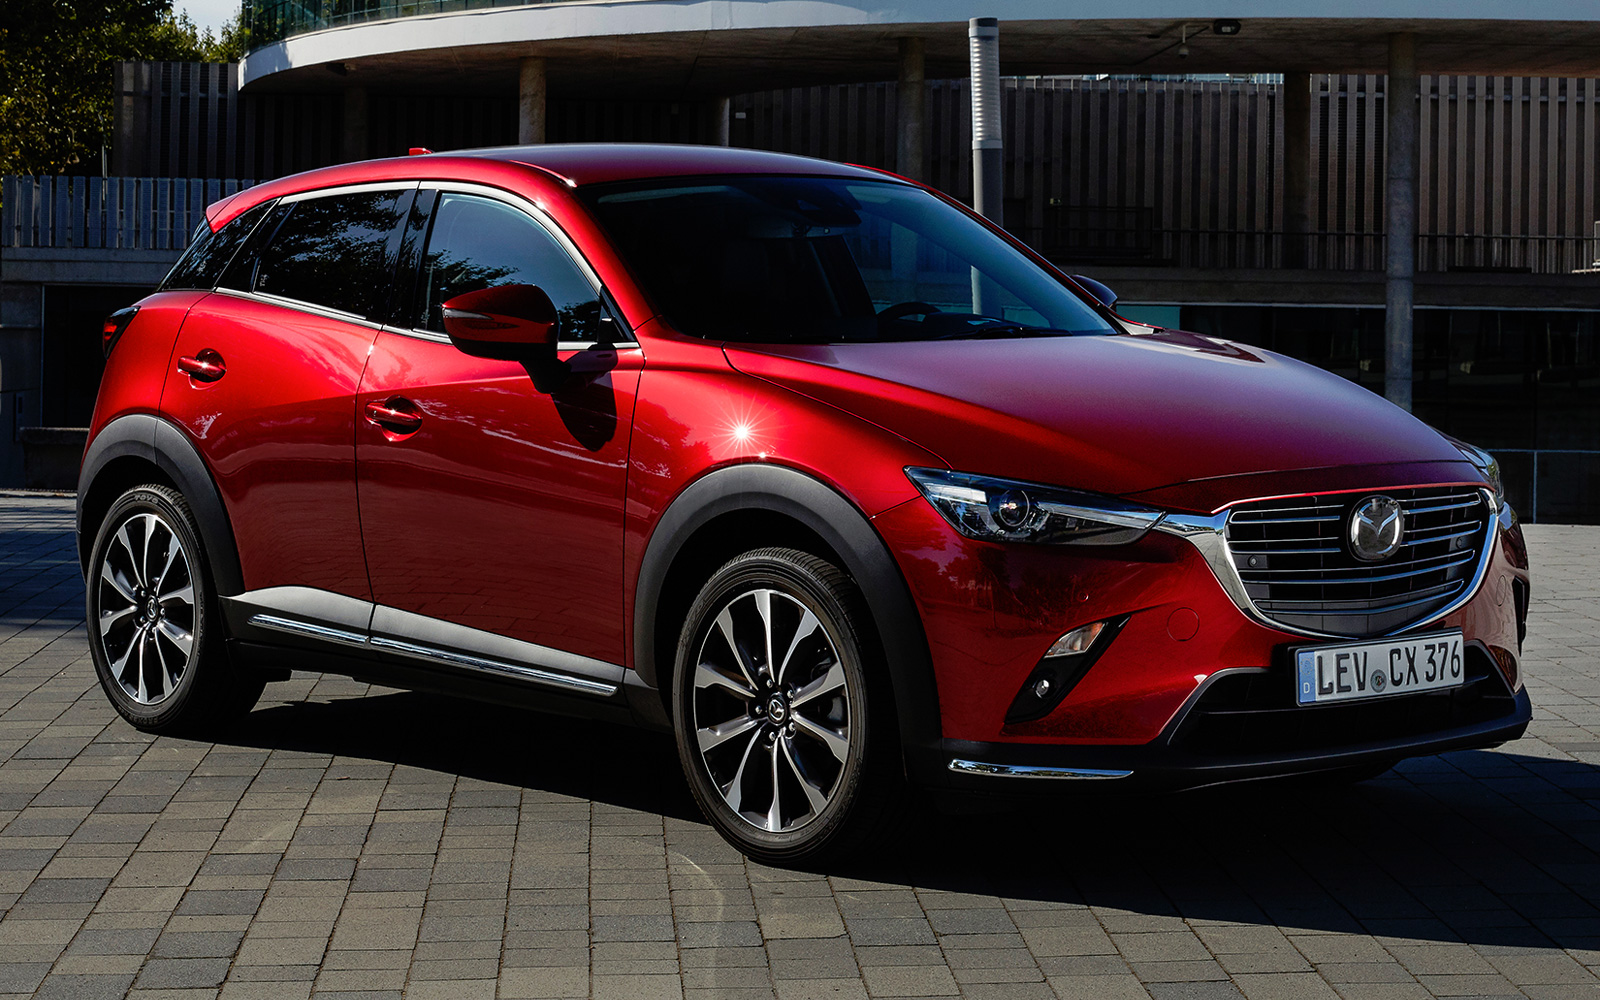 Три сх. Mazda CX 3 2020. Mazda CX 3 2022. Mazda CX-3 2018. Mazda cx3 4 WD.